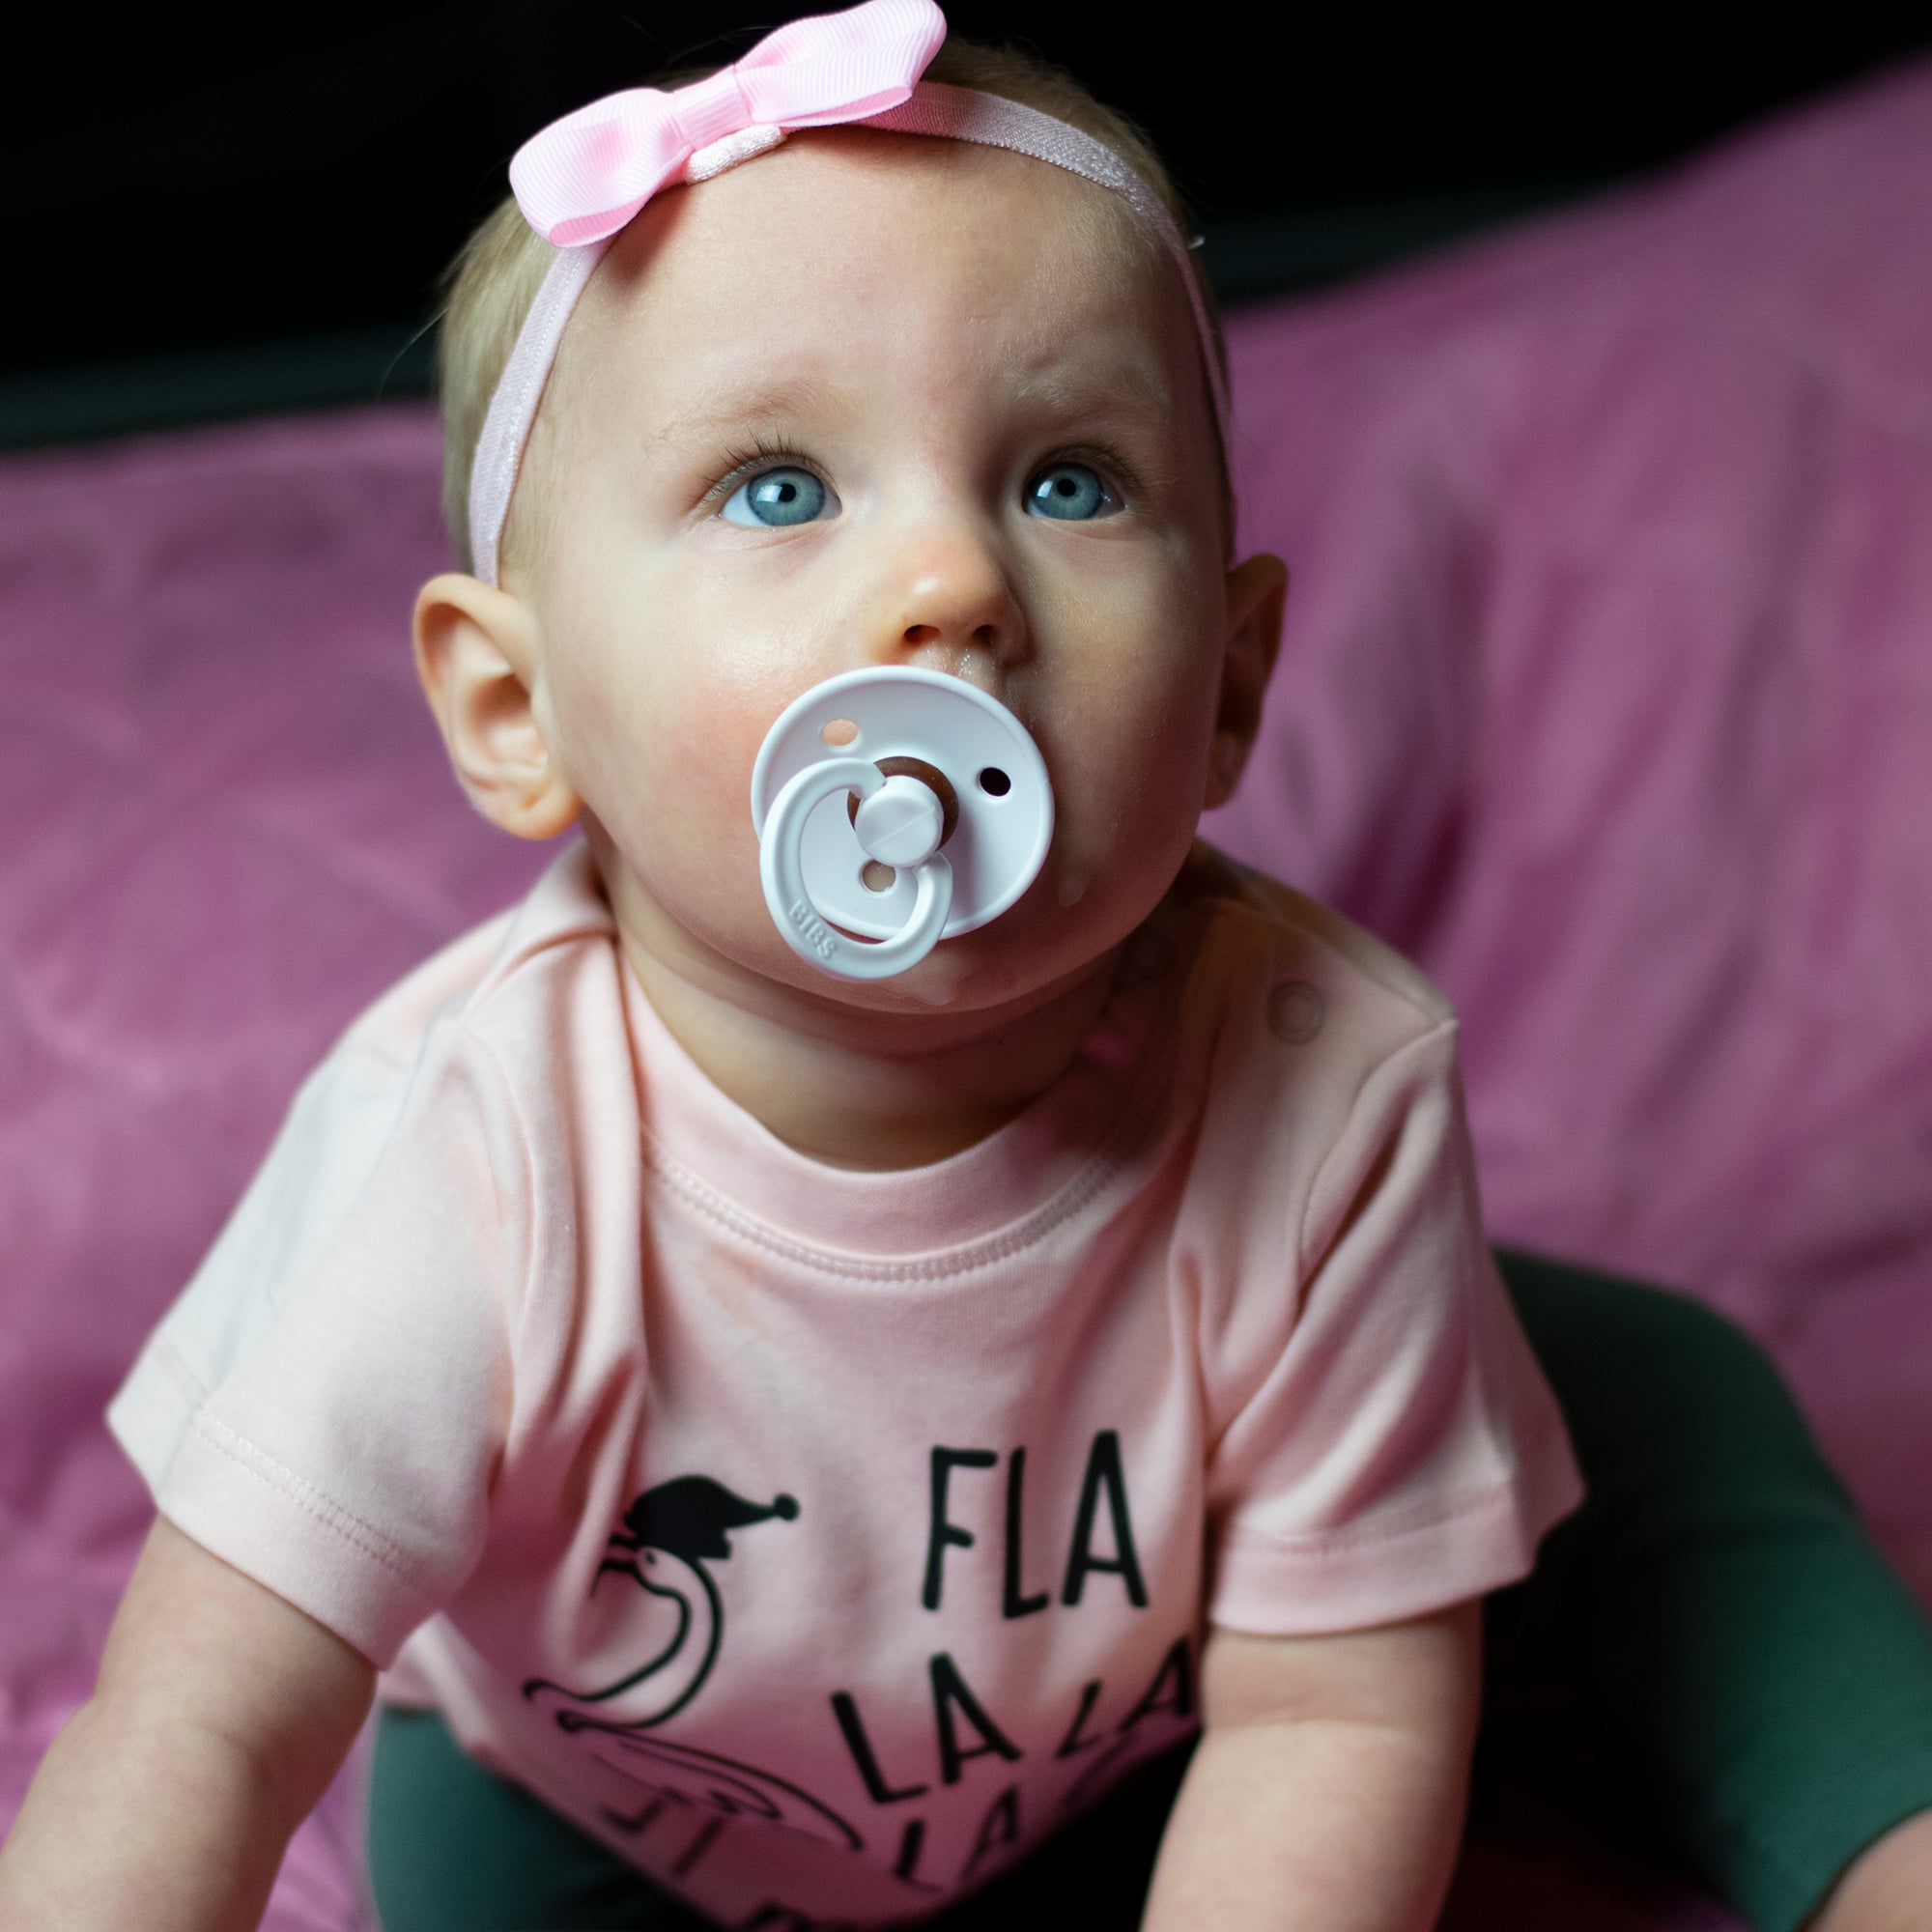 Baby girl with blue eyes, wearing a ppink headband and pink shirt, with 'Fla la la la la mingo' print by KMLeon looking up with pacifier.